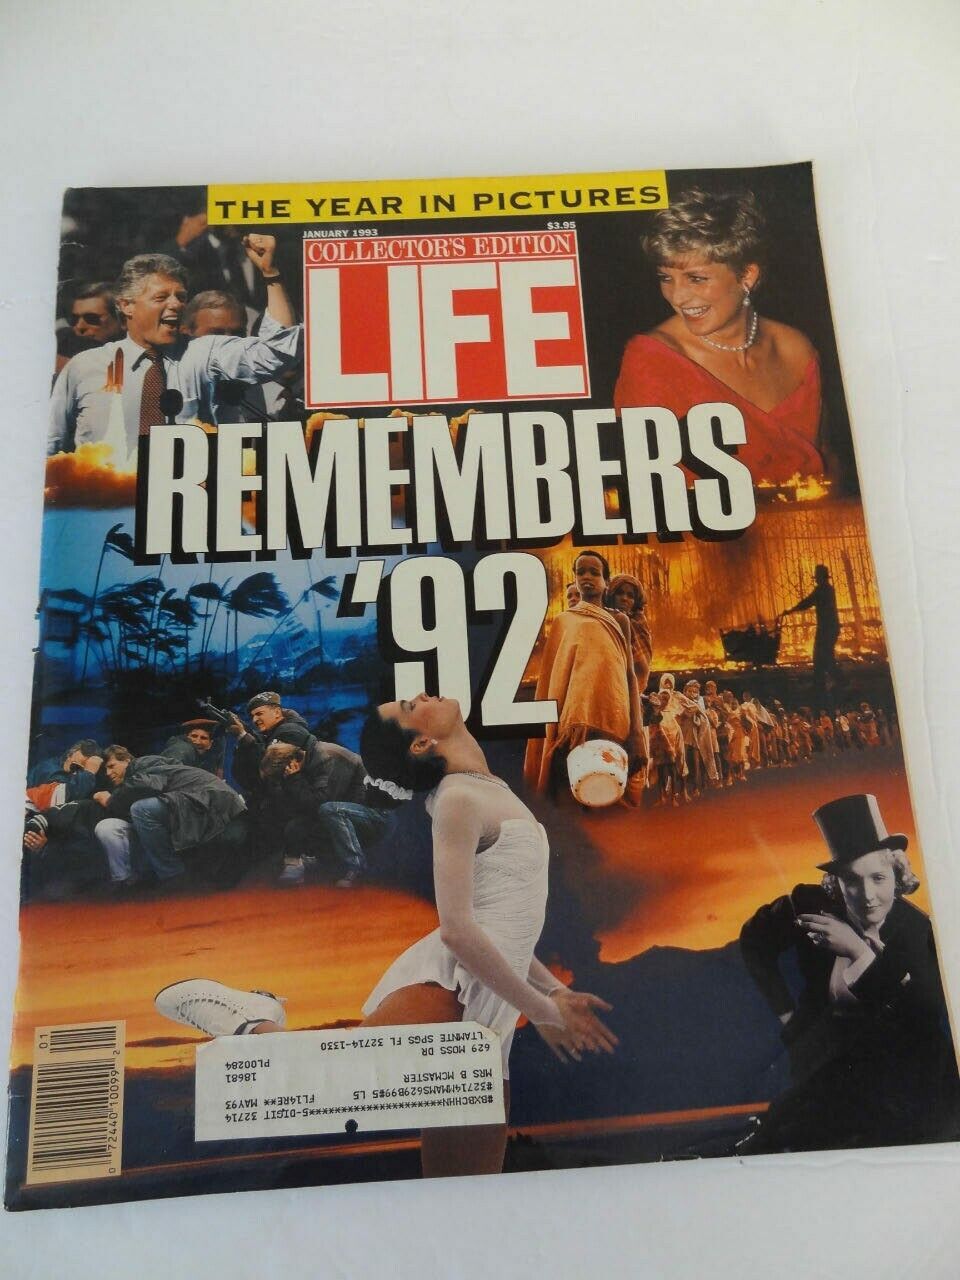 January1993 Life Magazine Remembers \'92 The Year in Pictures Collectors Edition